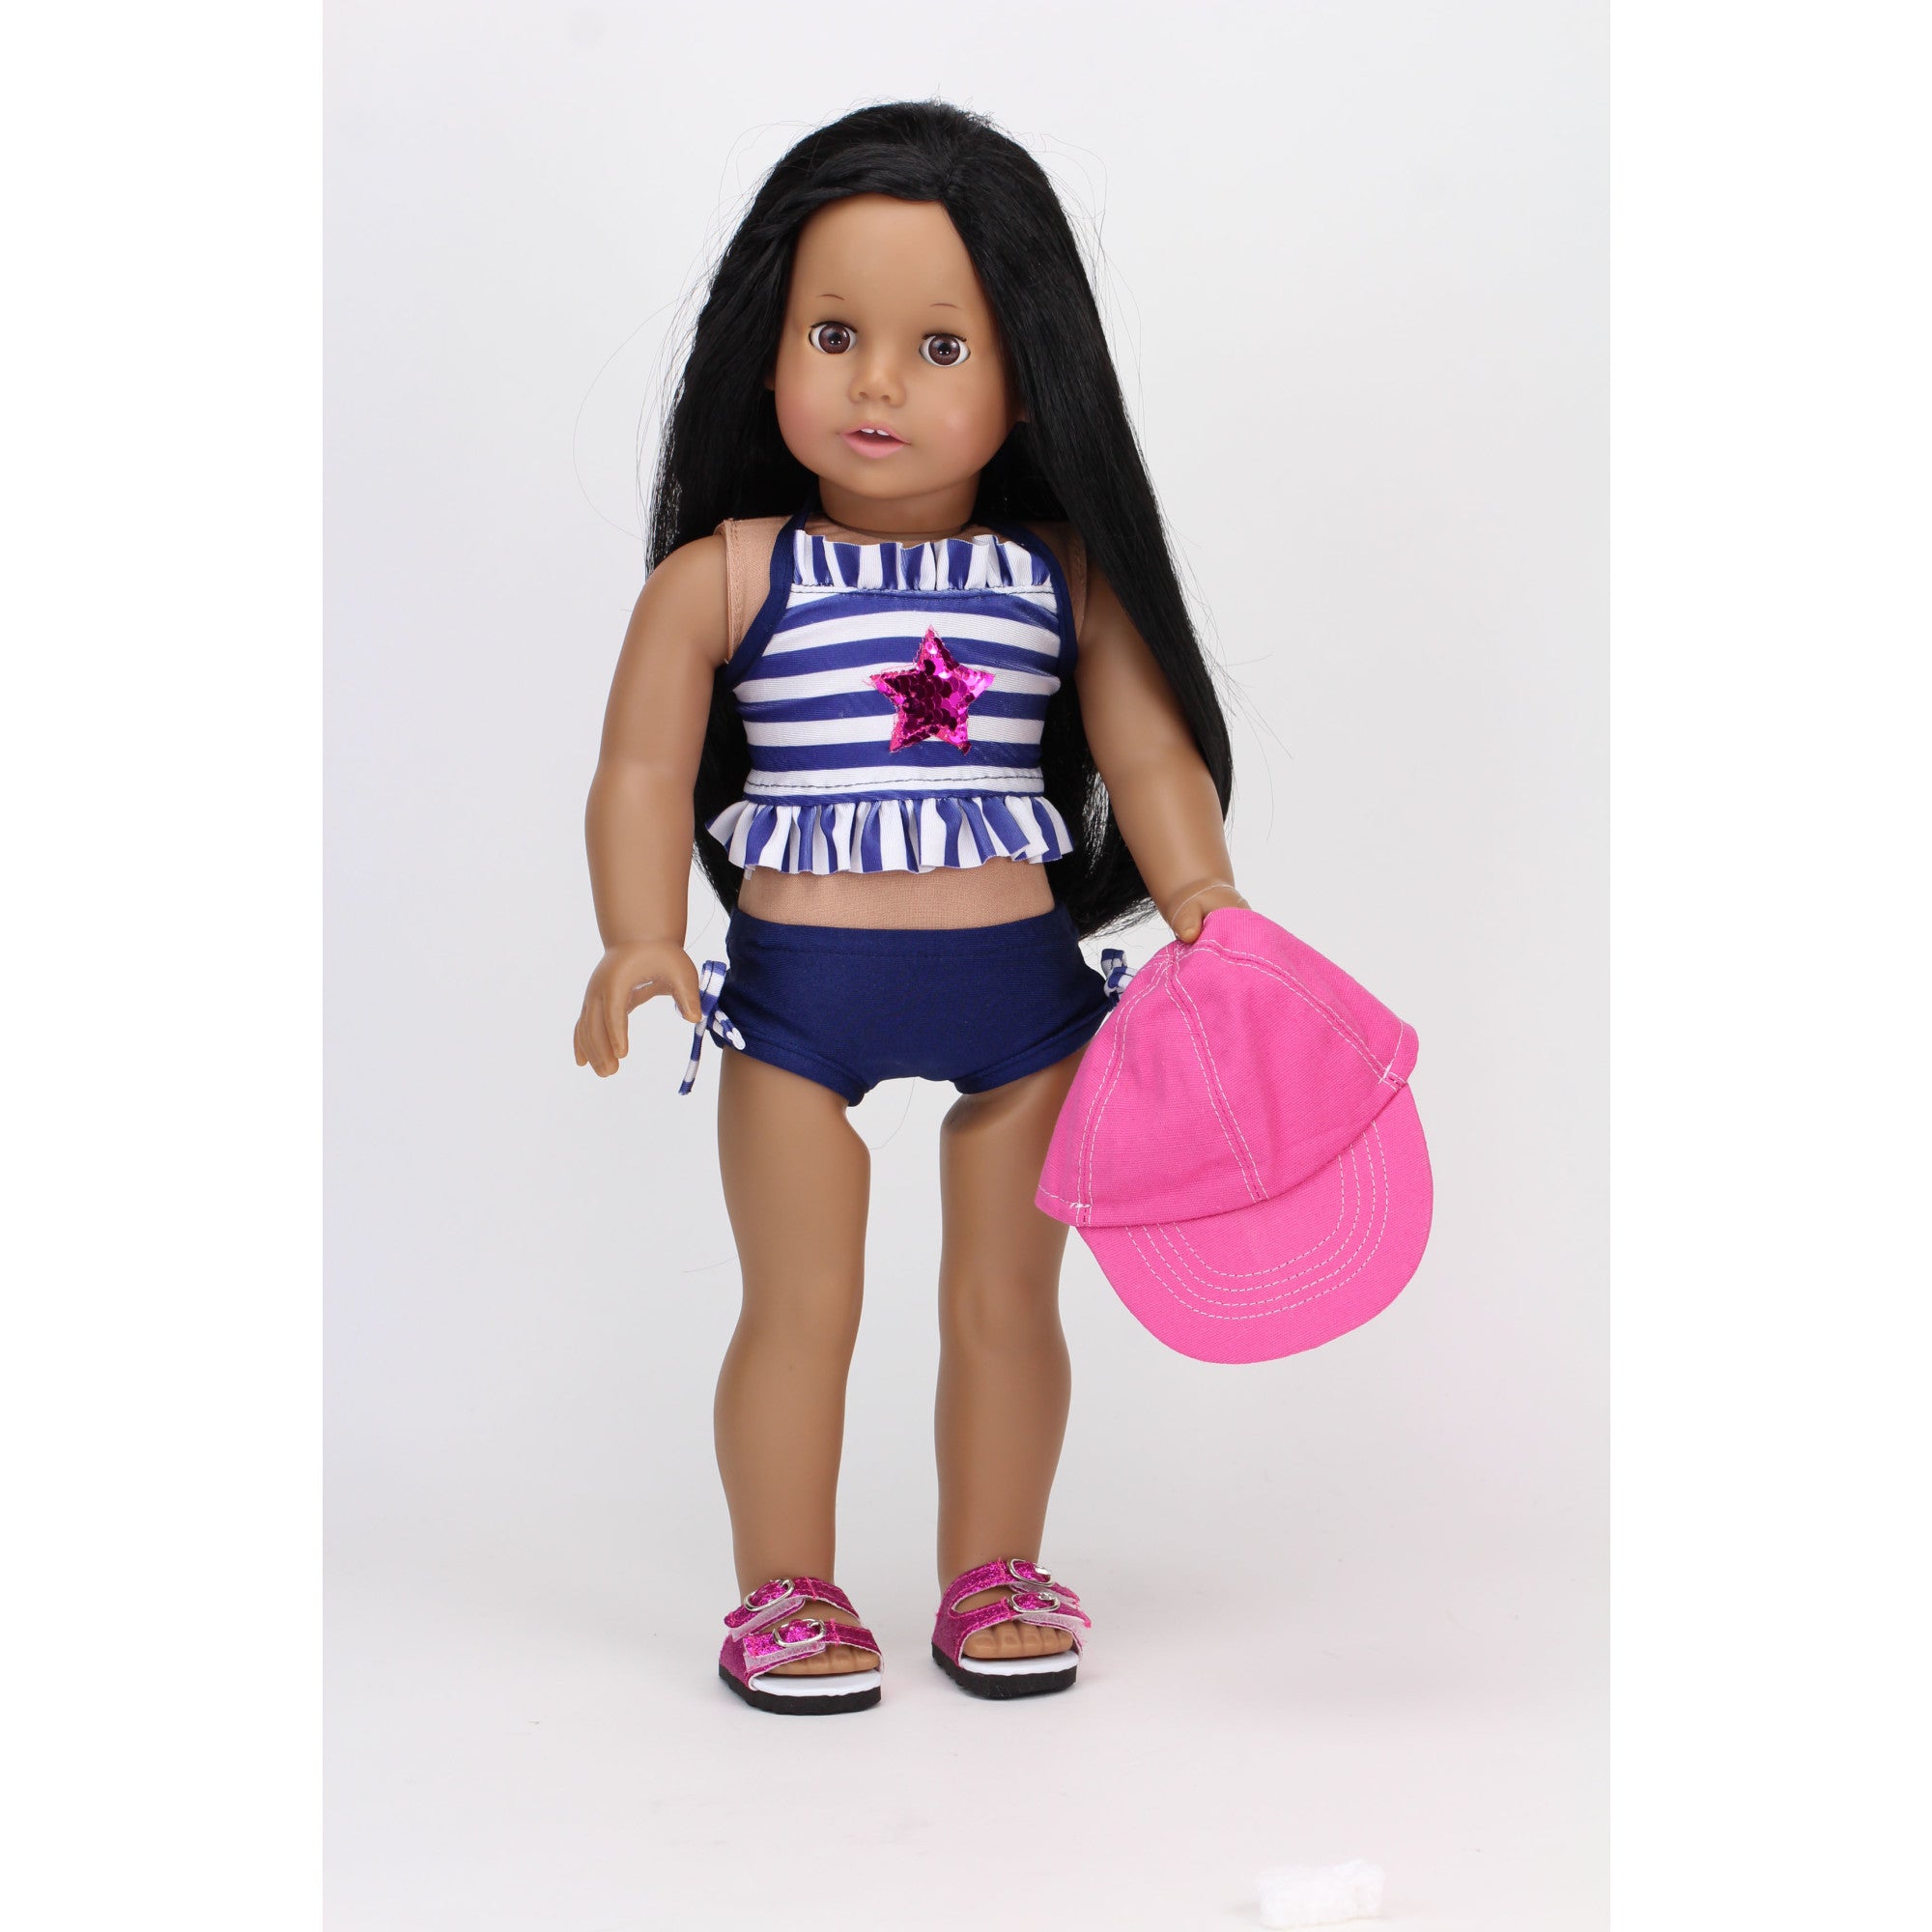 Sophia’s Striped Two-Piece Halter Swimsuit with Hot Pink Sequin Star Applique & Baseball Cap for 18” Dolls, Navy/Pink